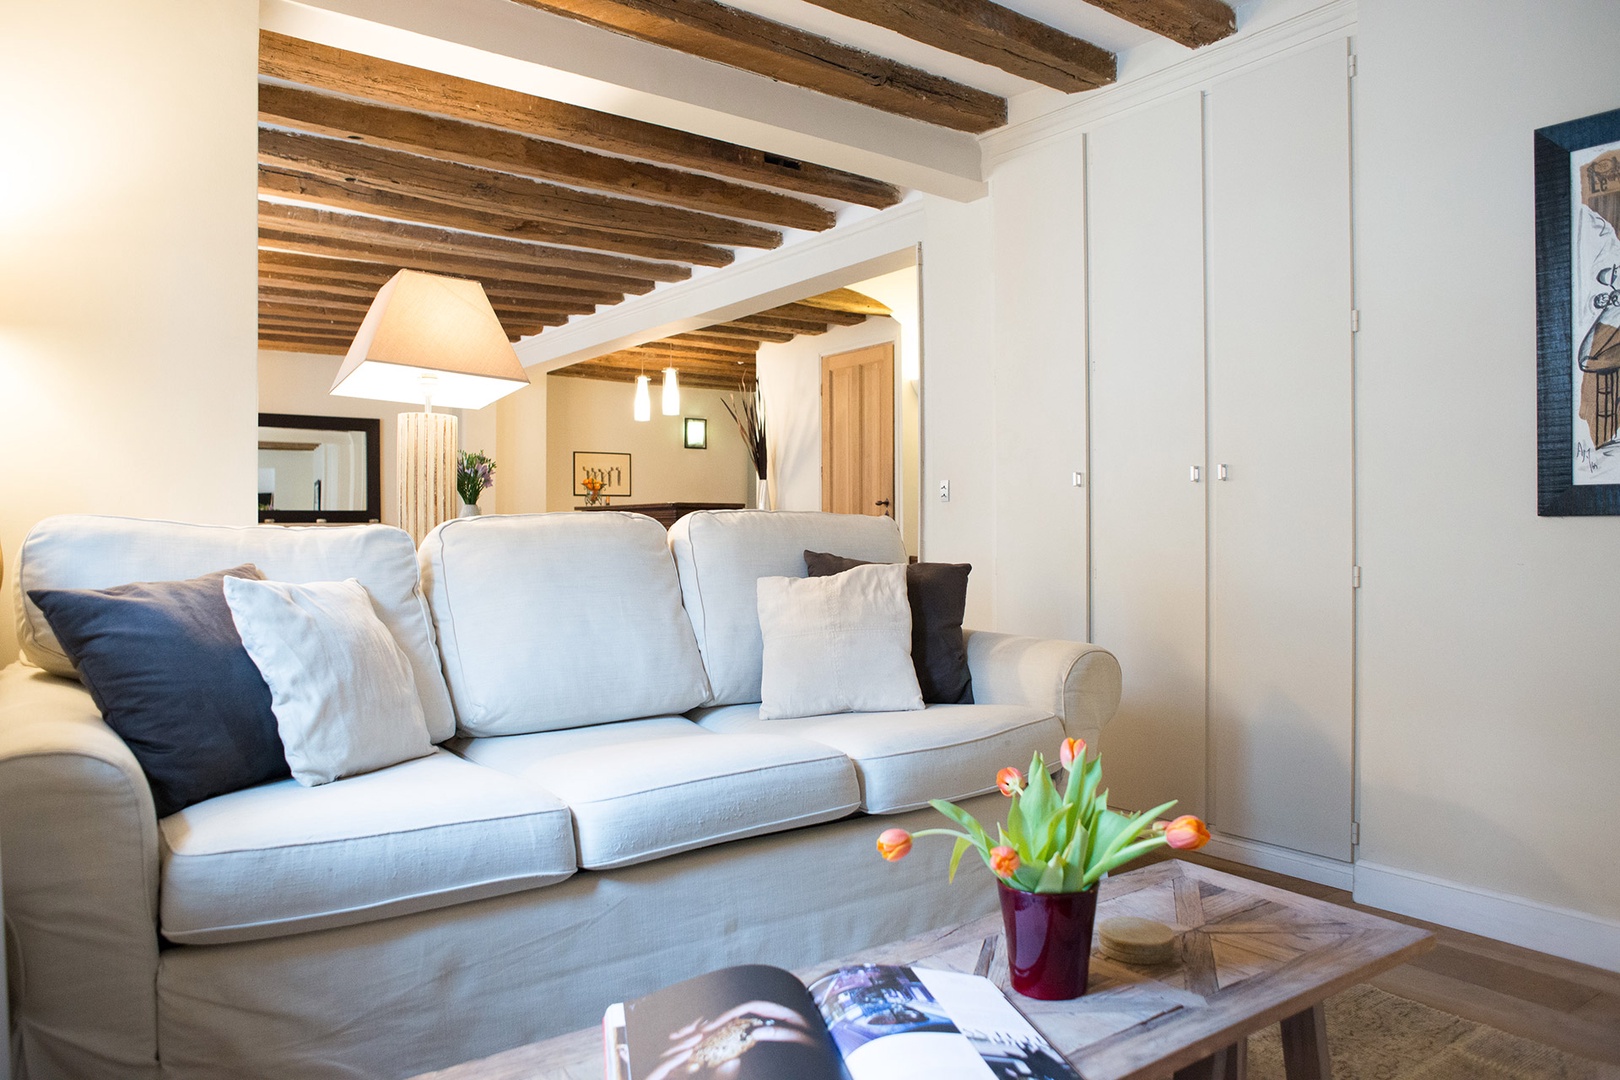 Warm and inviting, the apartment exudes a French countryside vibe.